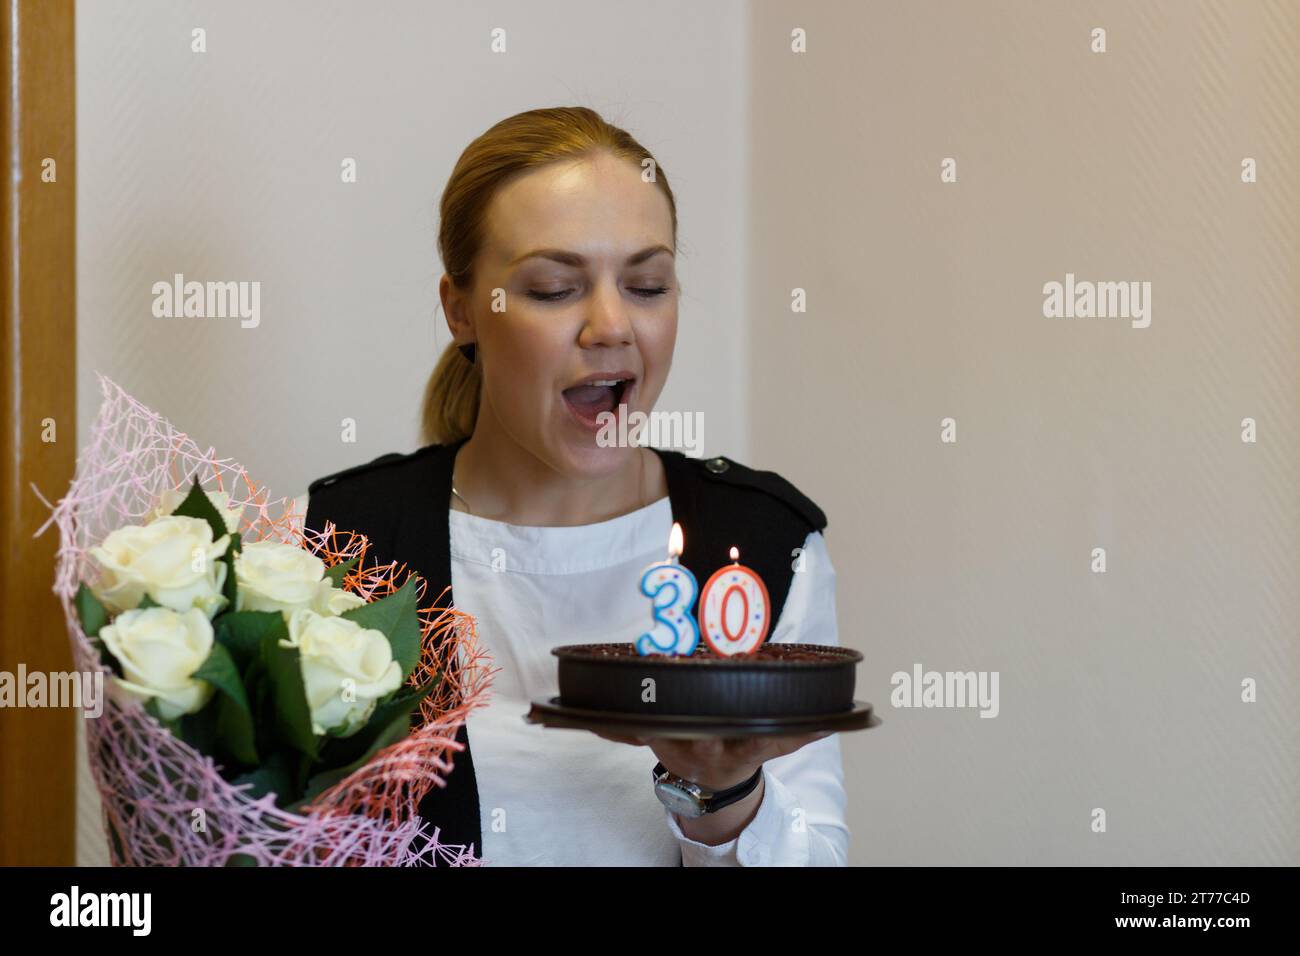 A young happy woman with a bouquet of flowers in her hands blows out the candles on the cake, celebrates her thirtieth birthday. Stock Photo